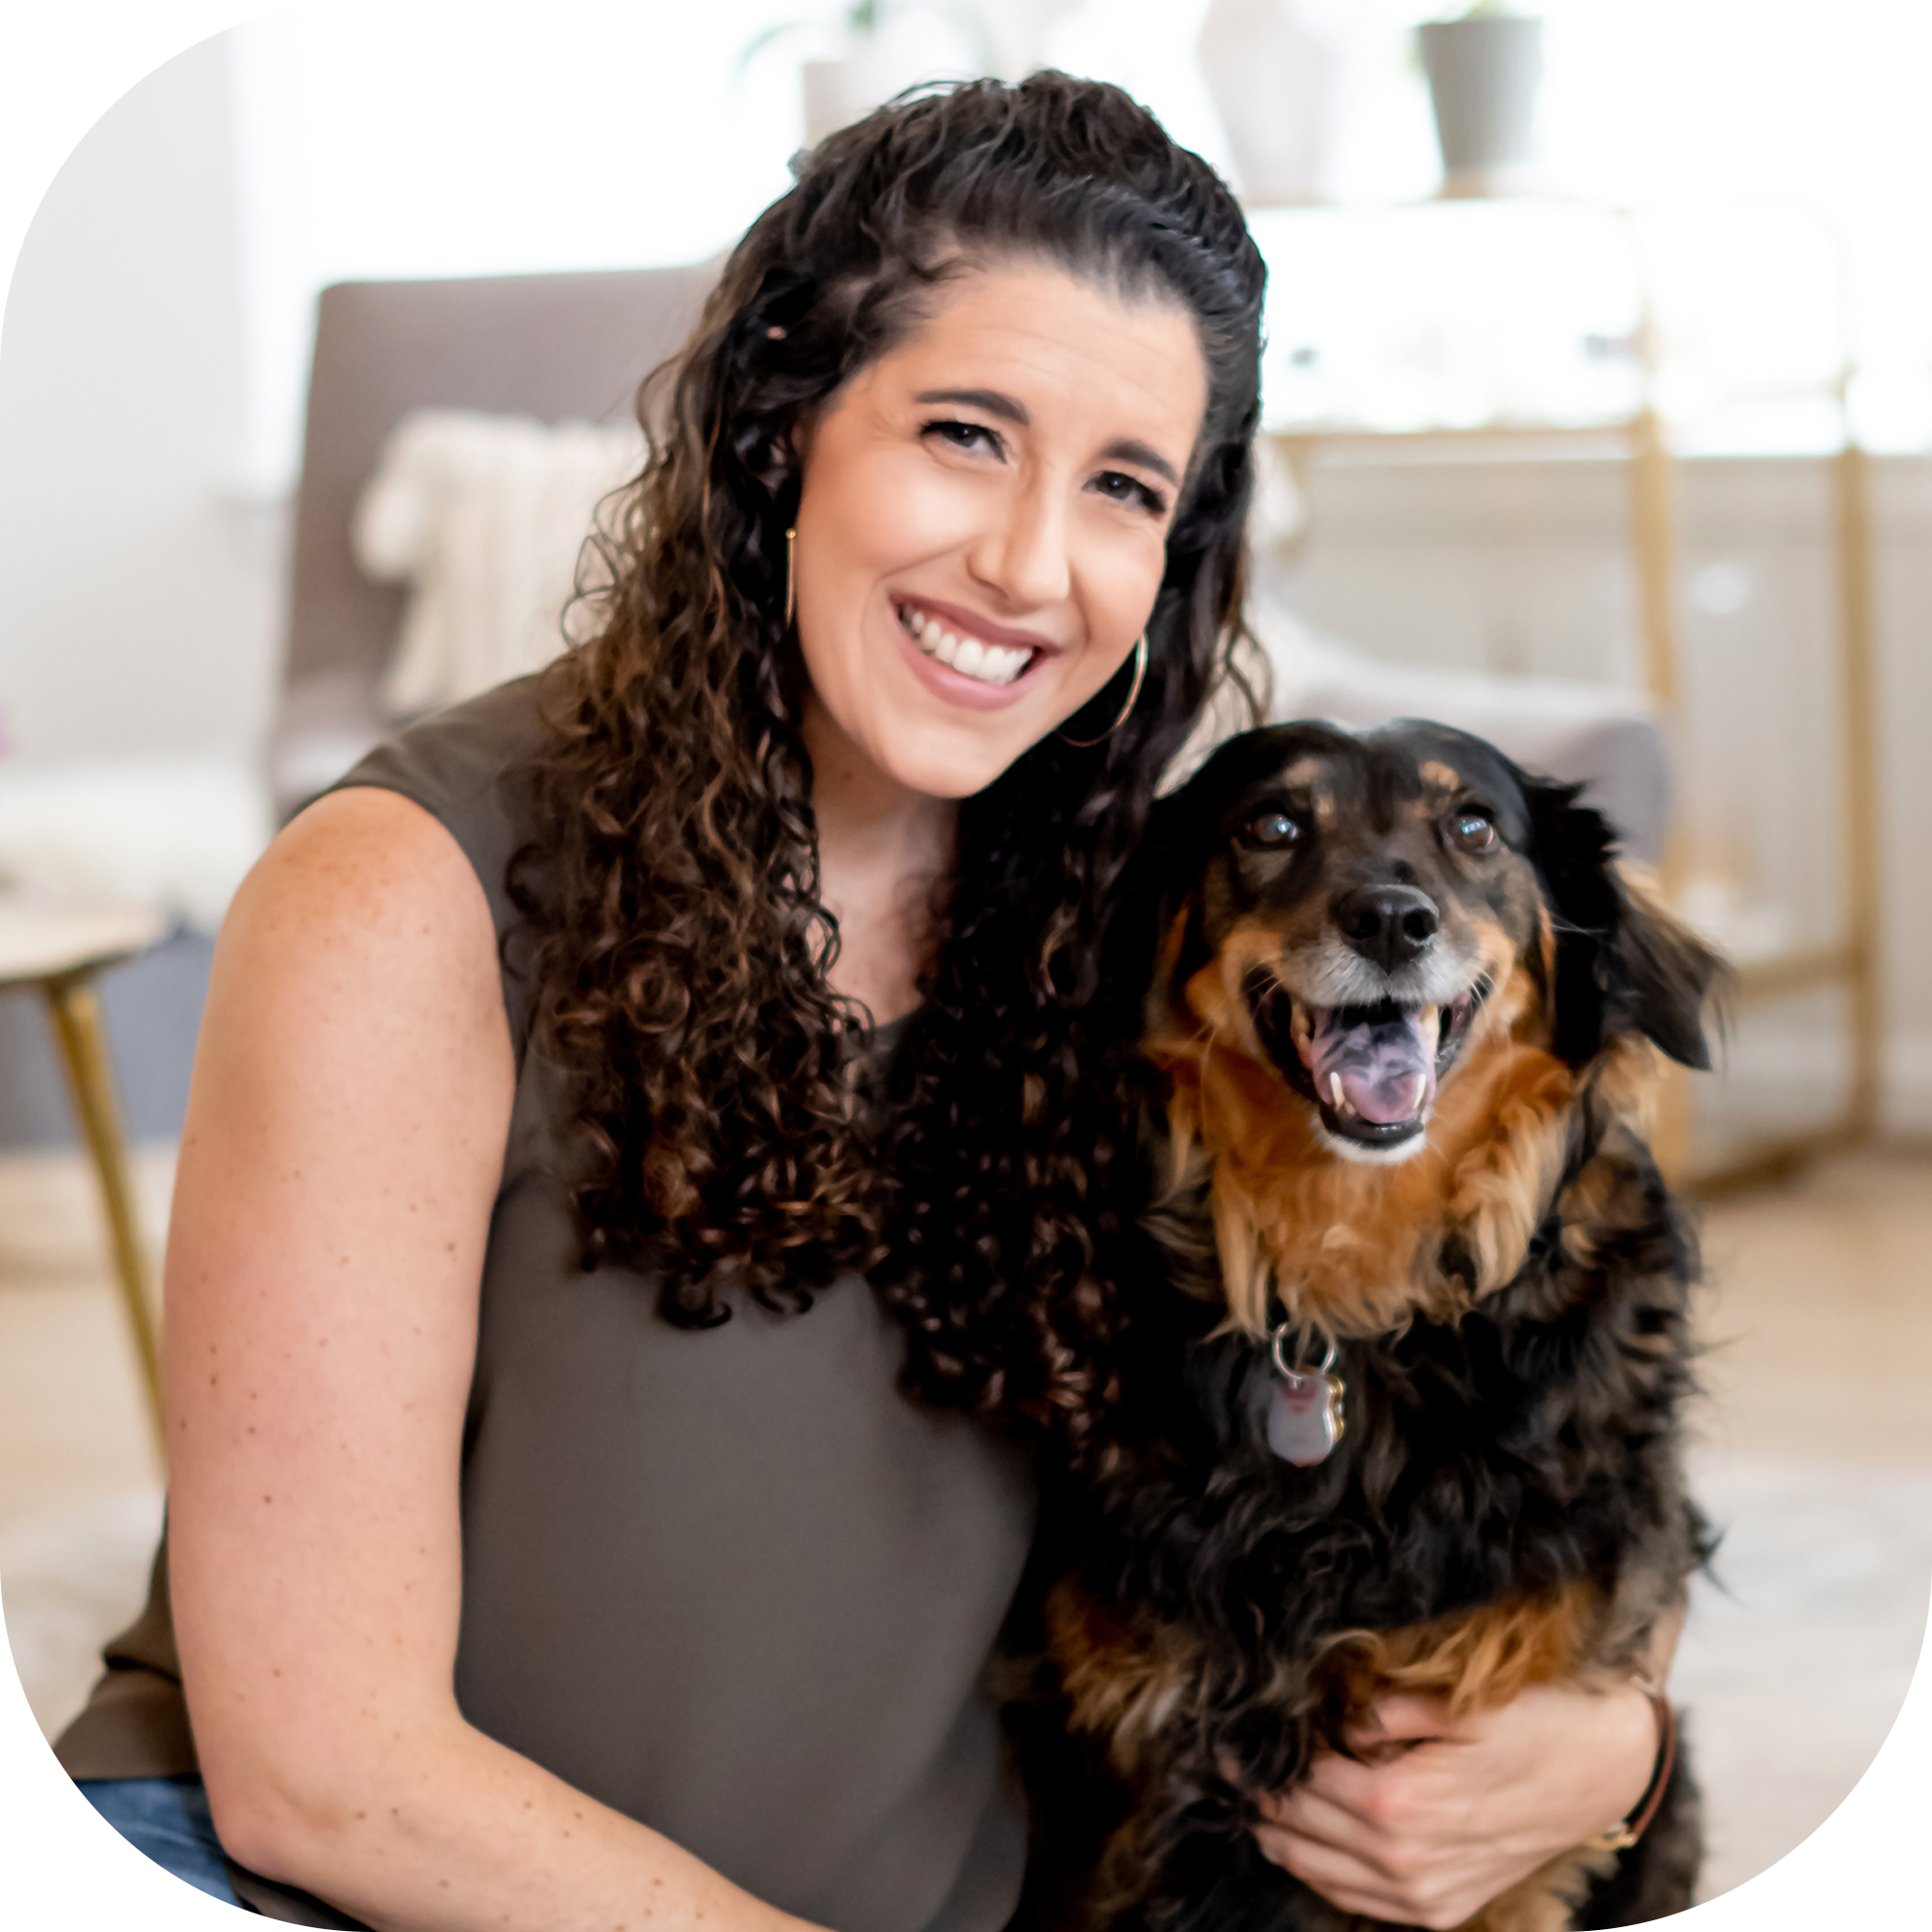 Laura Goldstein, LCMFT with her dog